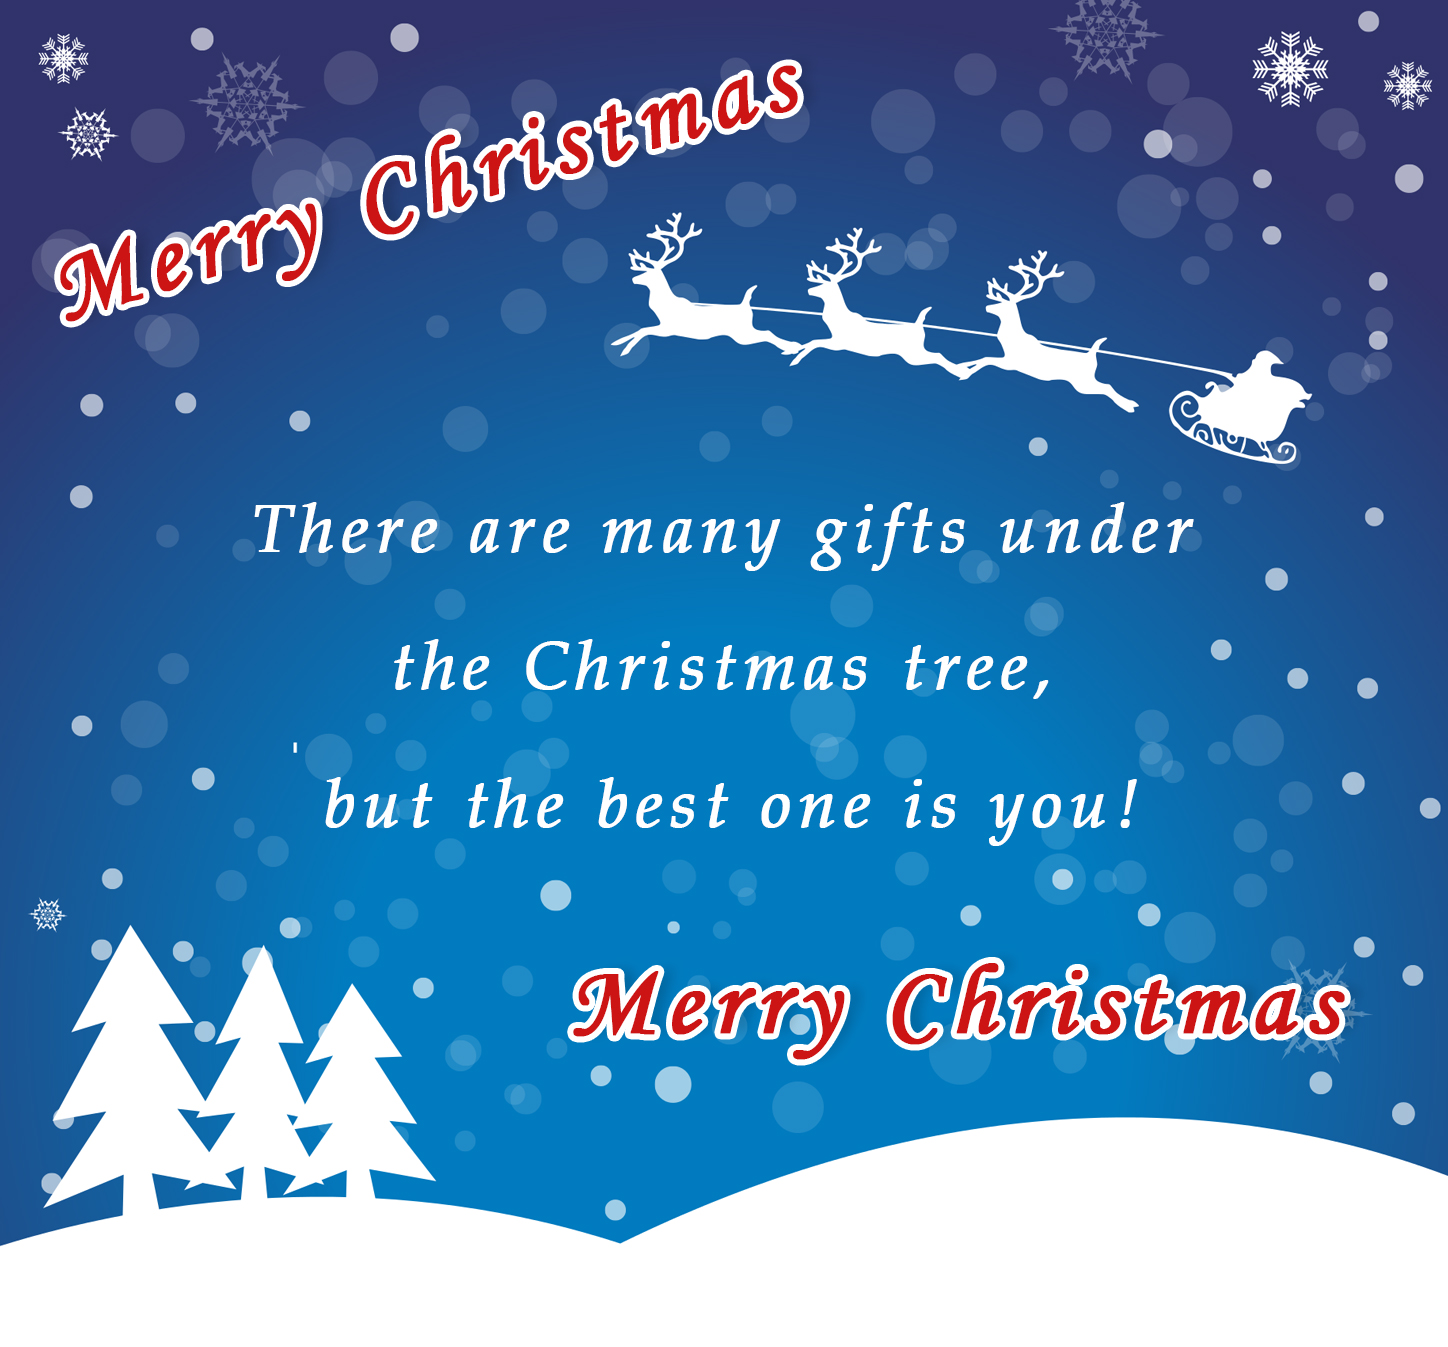 Merry Christmas Image Wishes Quotes